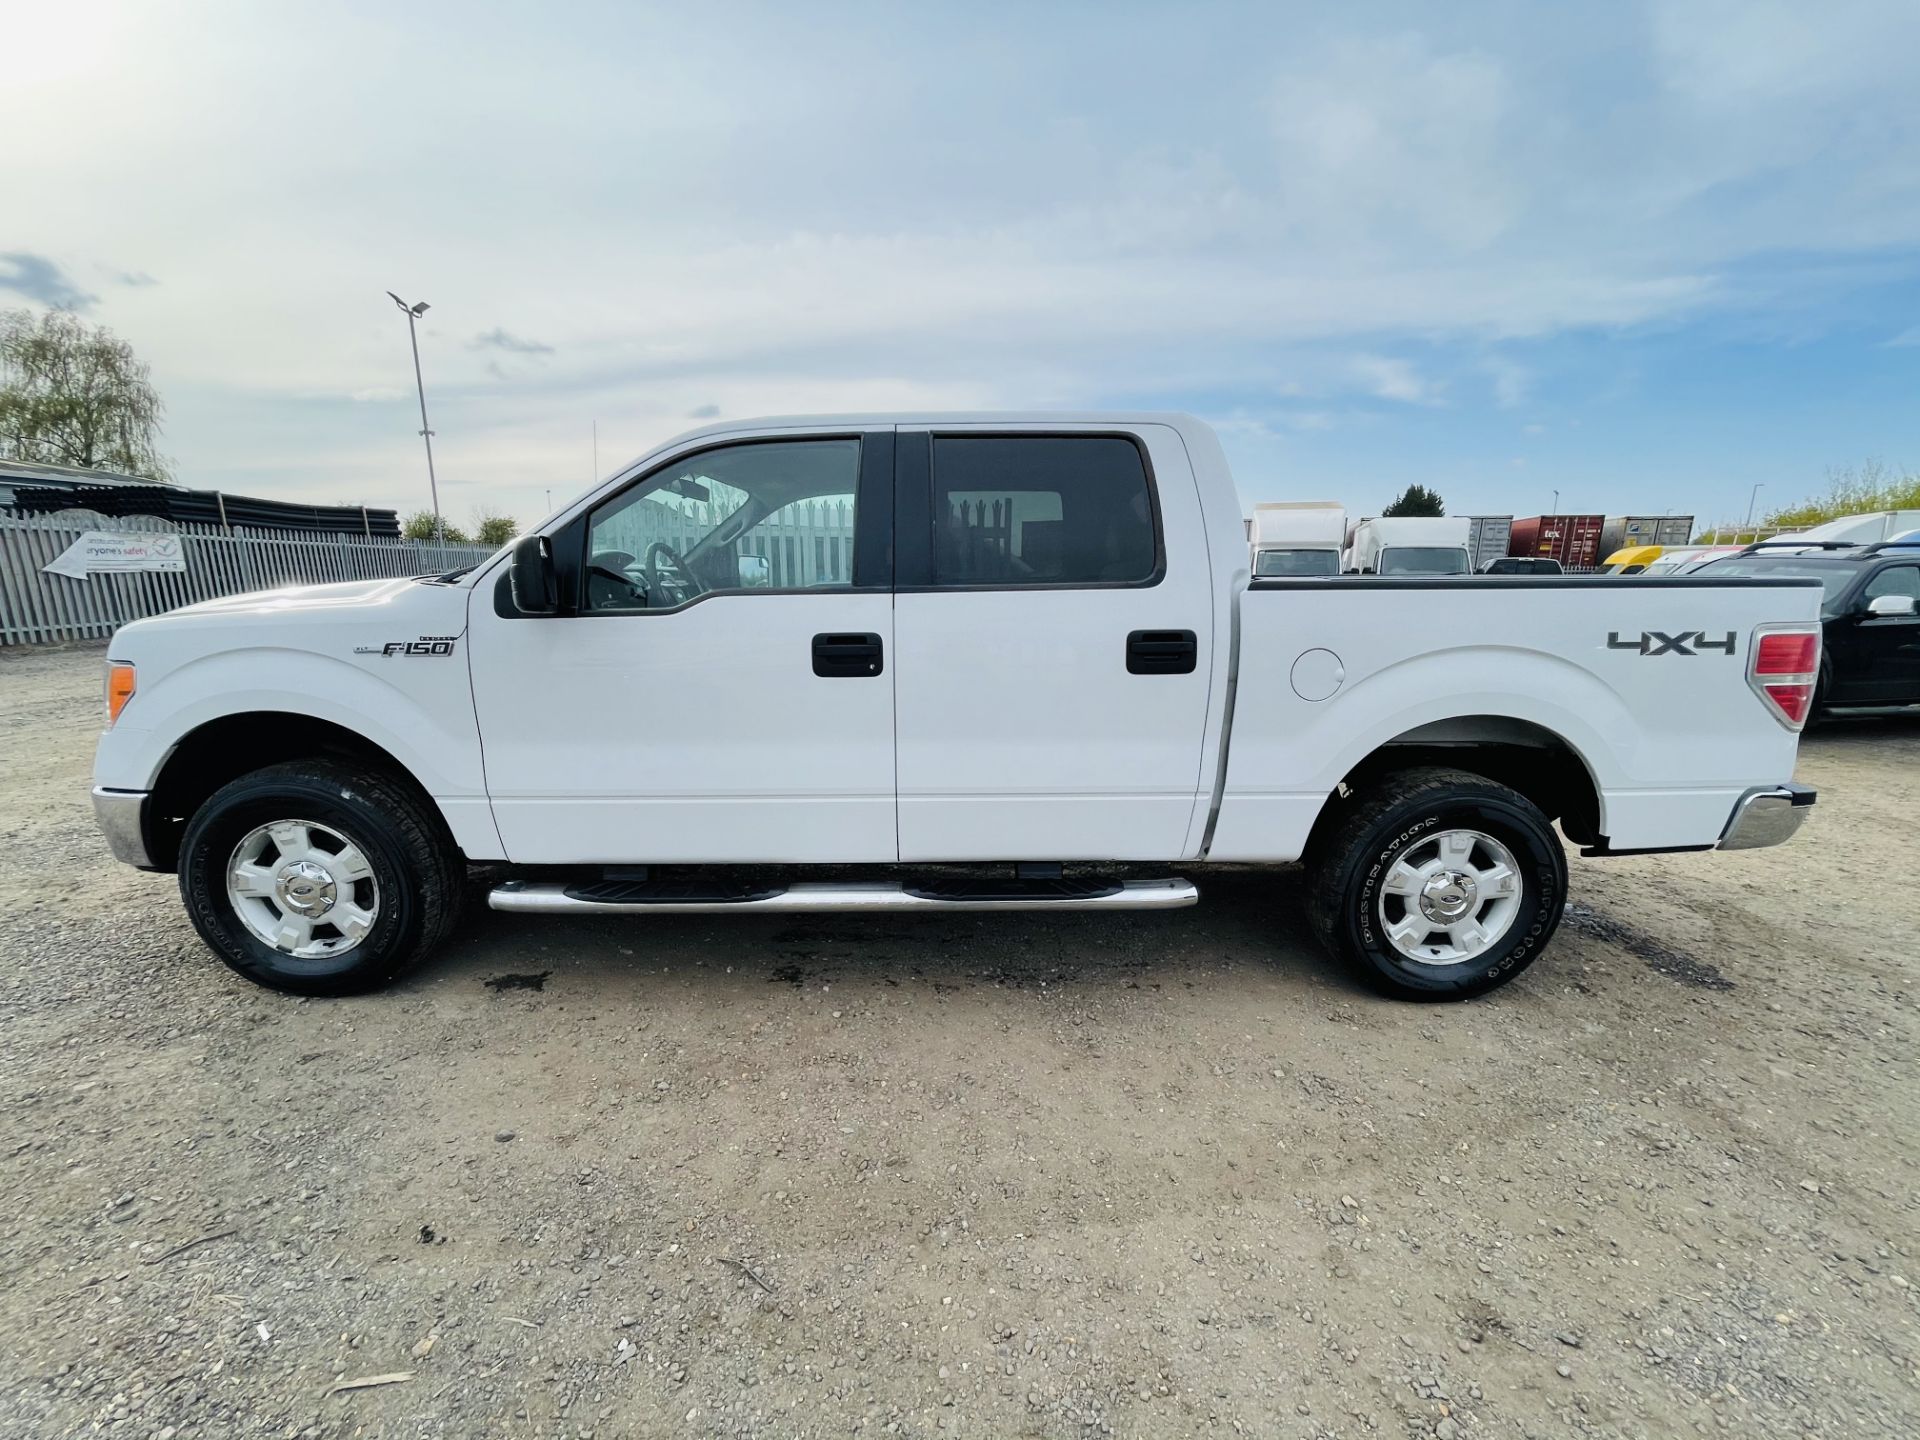 ** ON SALE ** Ford F-150 XLT 4.6L V8 Super-crew 4WD 2010 ' 2010 Year' 6 Seats - Air con - - Image 7 of 24